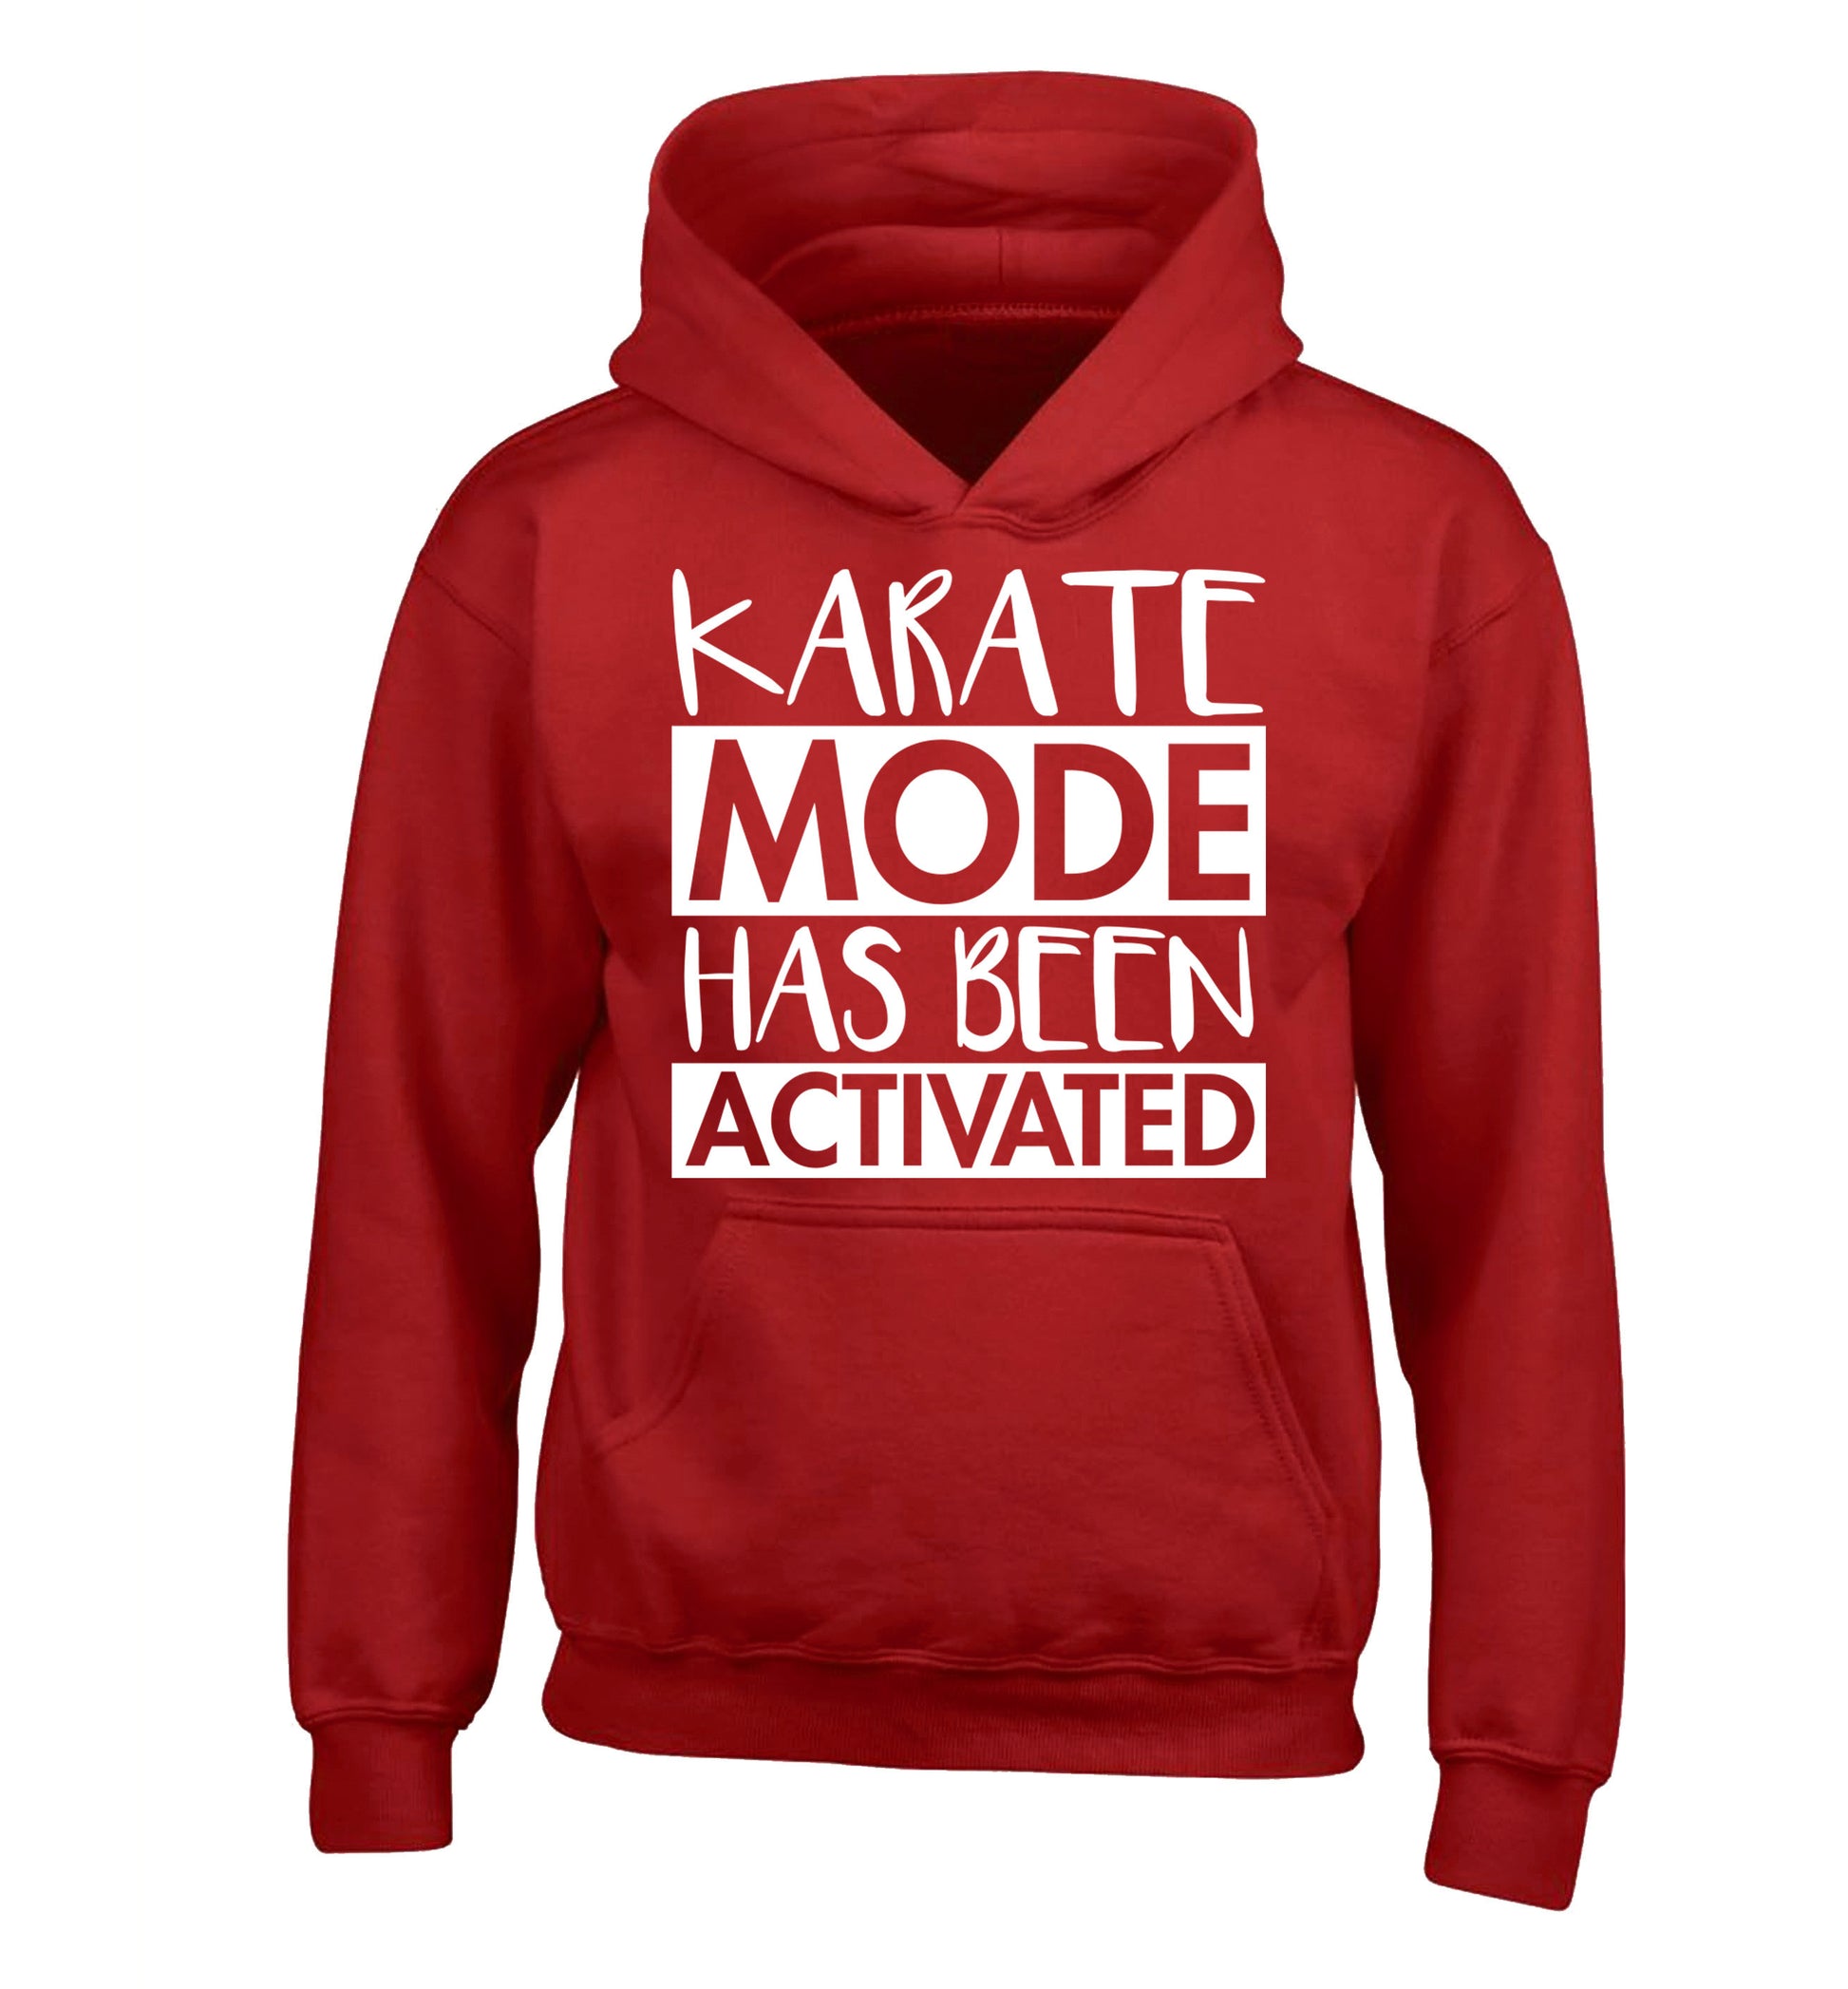 Karate mode activated children's red hoodie 12-14 Years